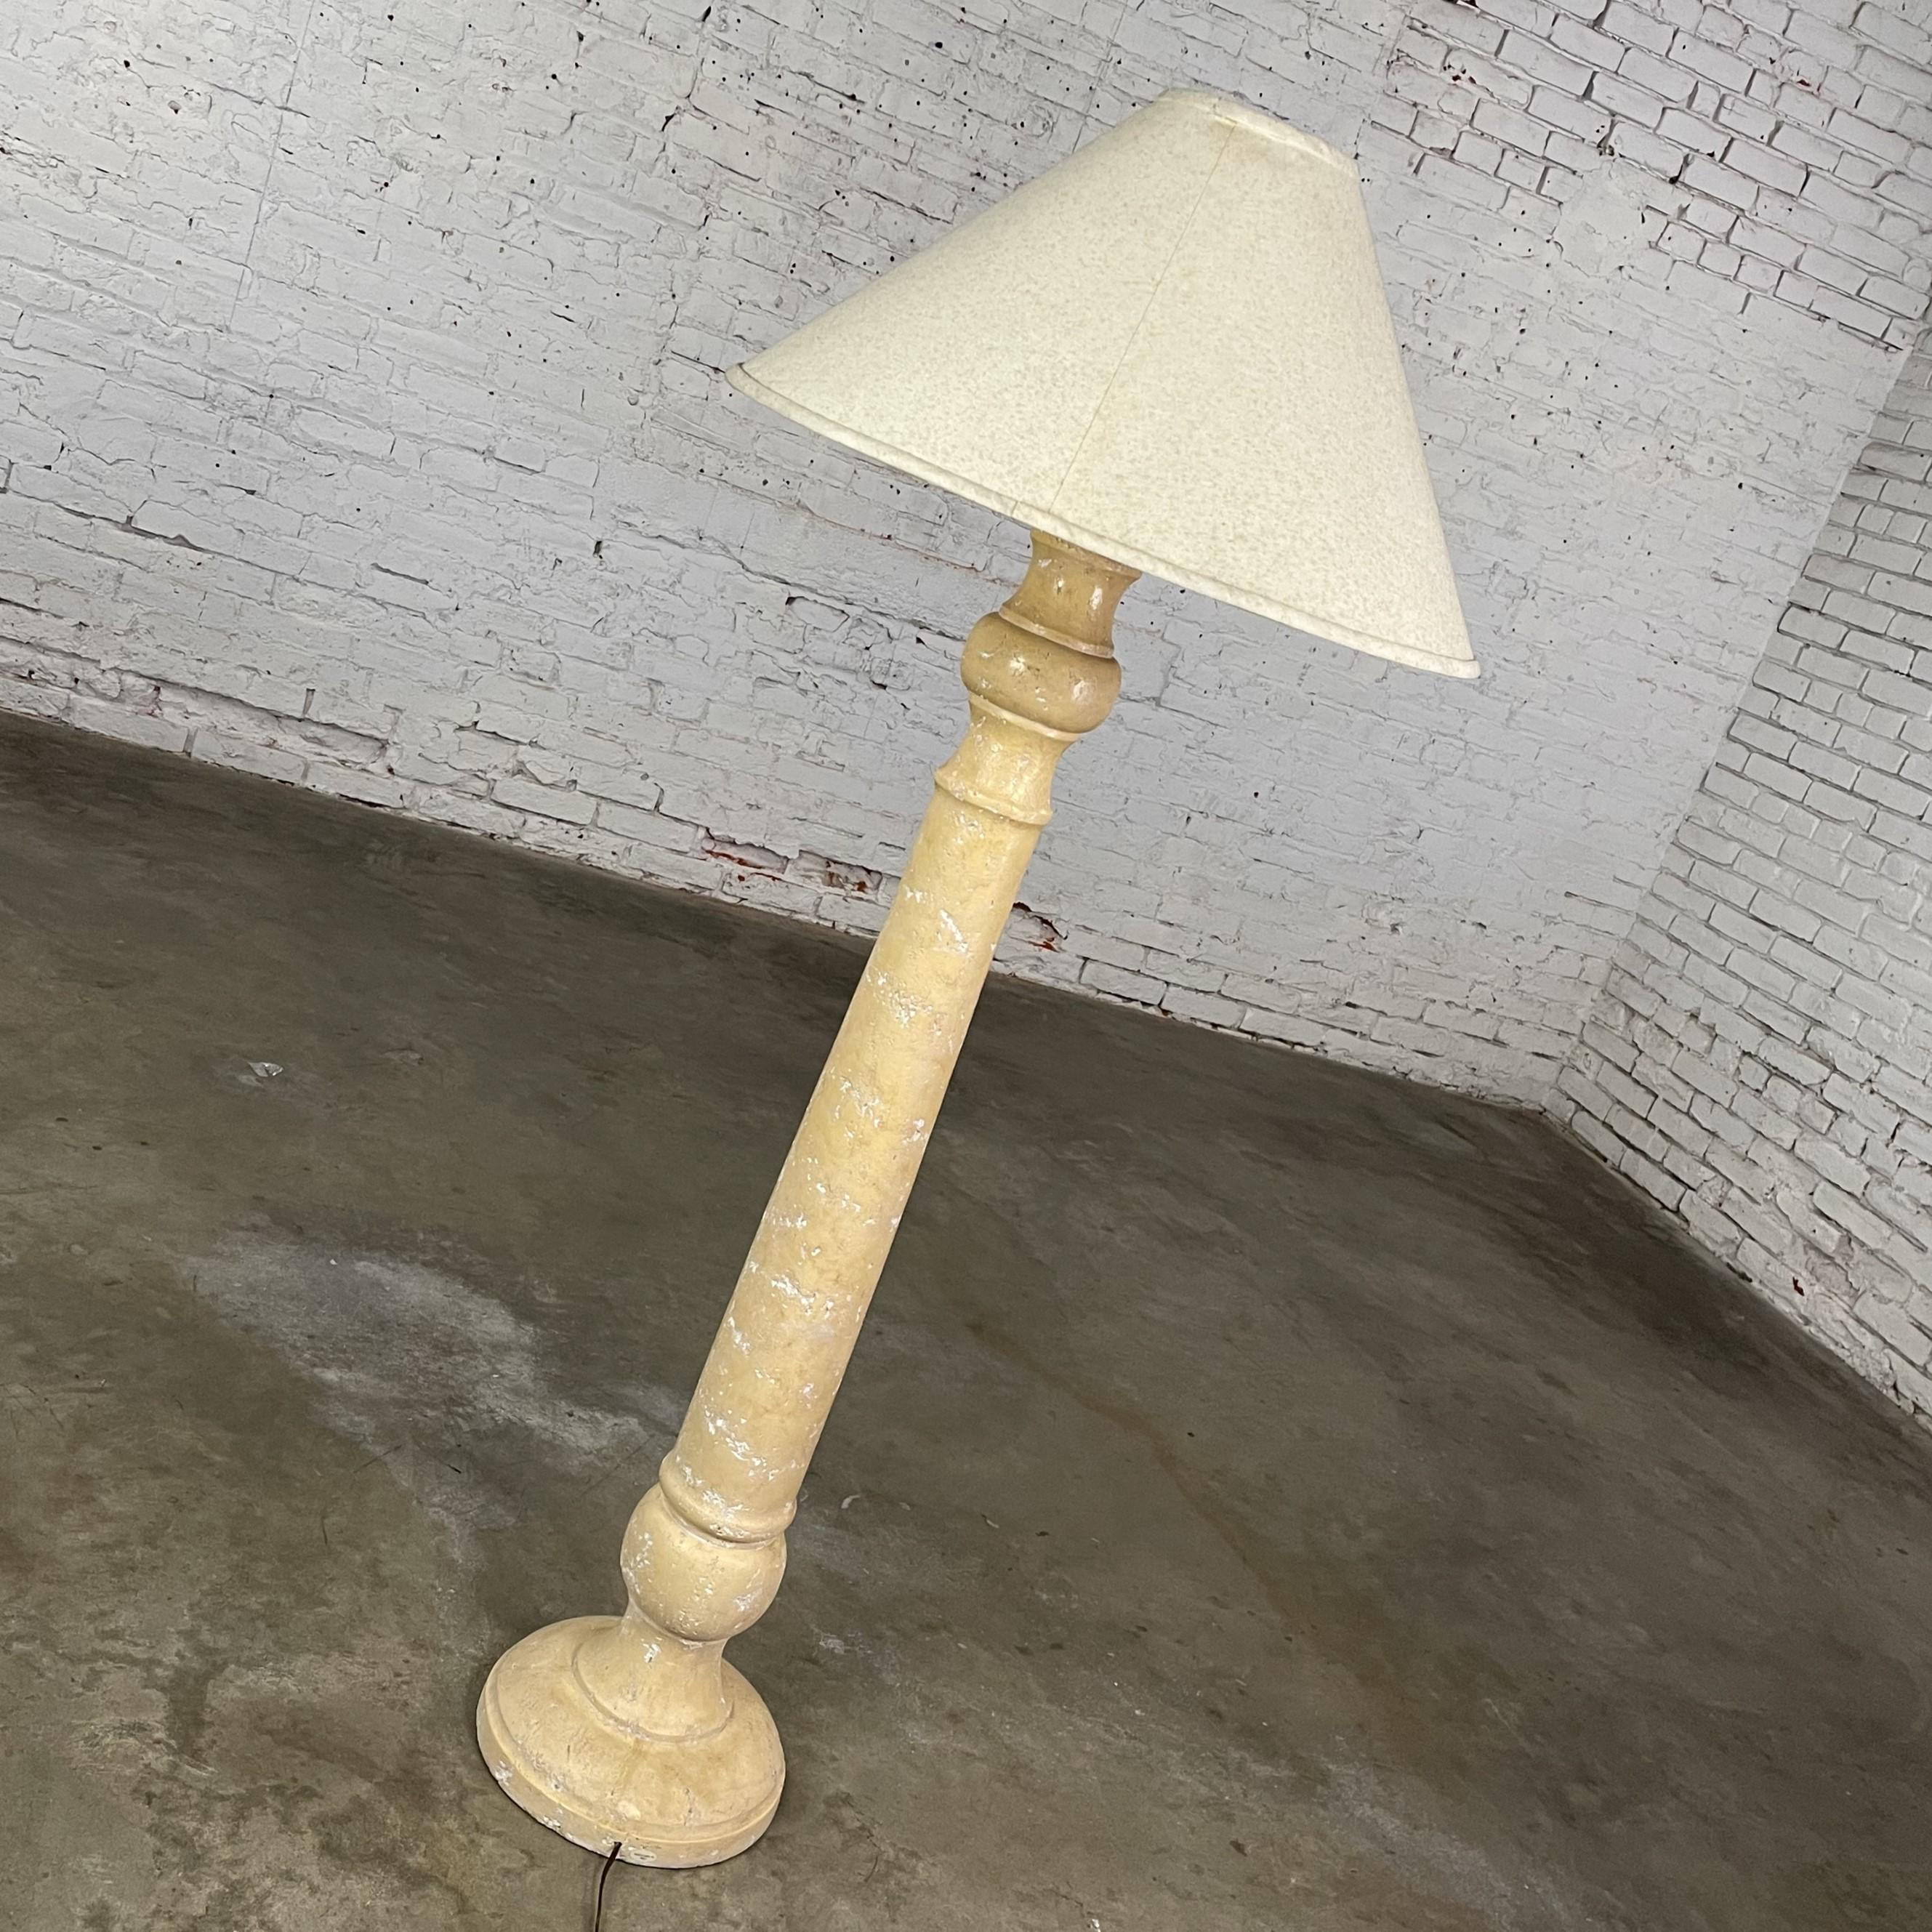 Wonderful vintage column floor lamp with a natural faux travertine plaster finish & original white linen-look coolie shade stamped 1986 House of Lamps. Beautiful condition, keeping in mind that this is vintage and not new so will have signs of use